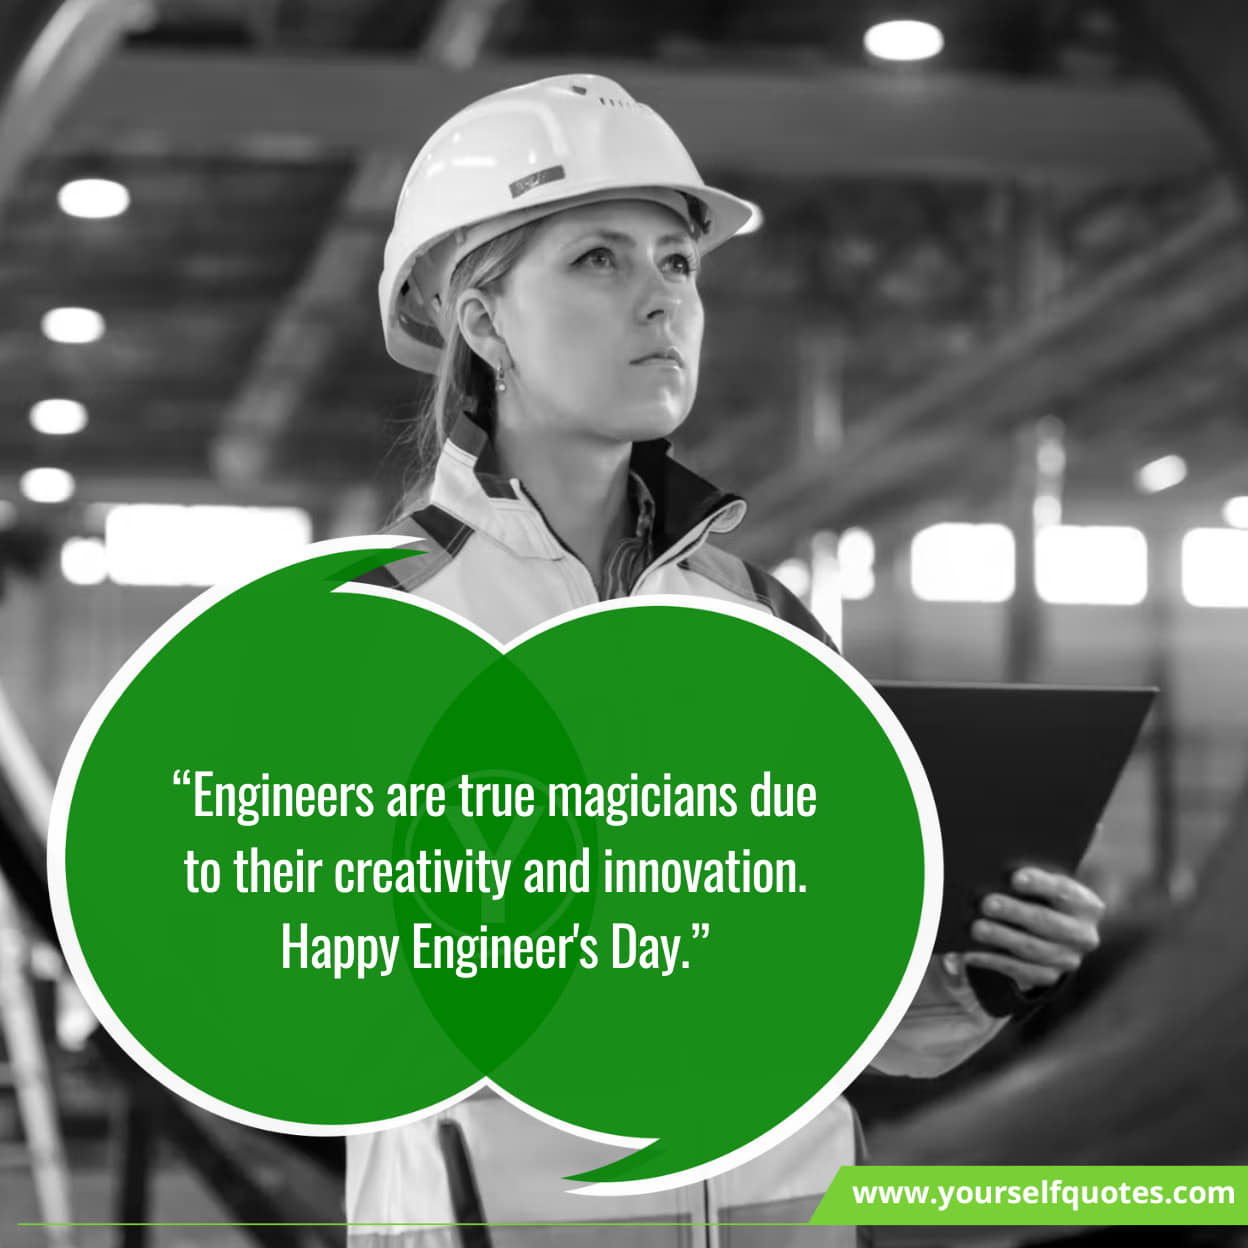 Happy Engineers Day Inspirational Messages